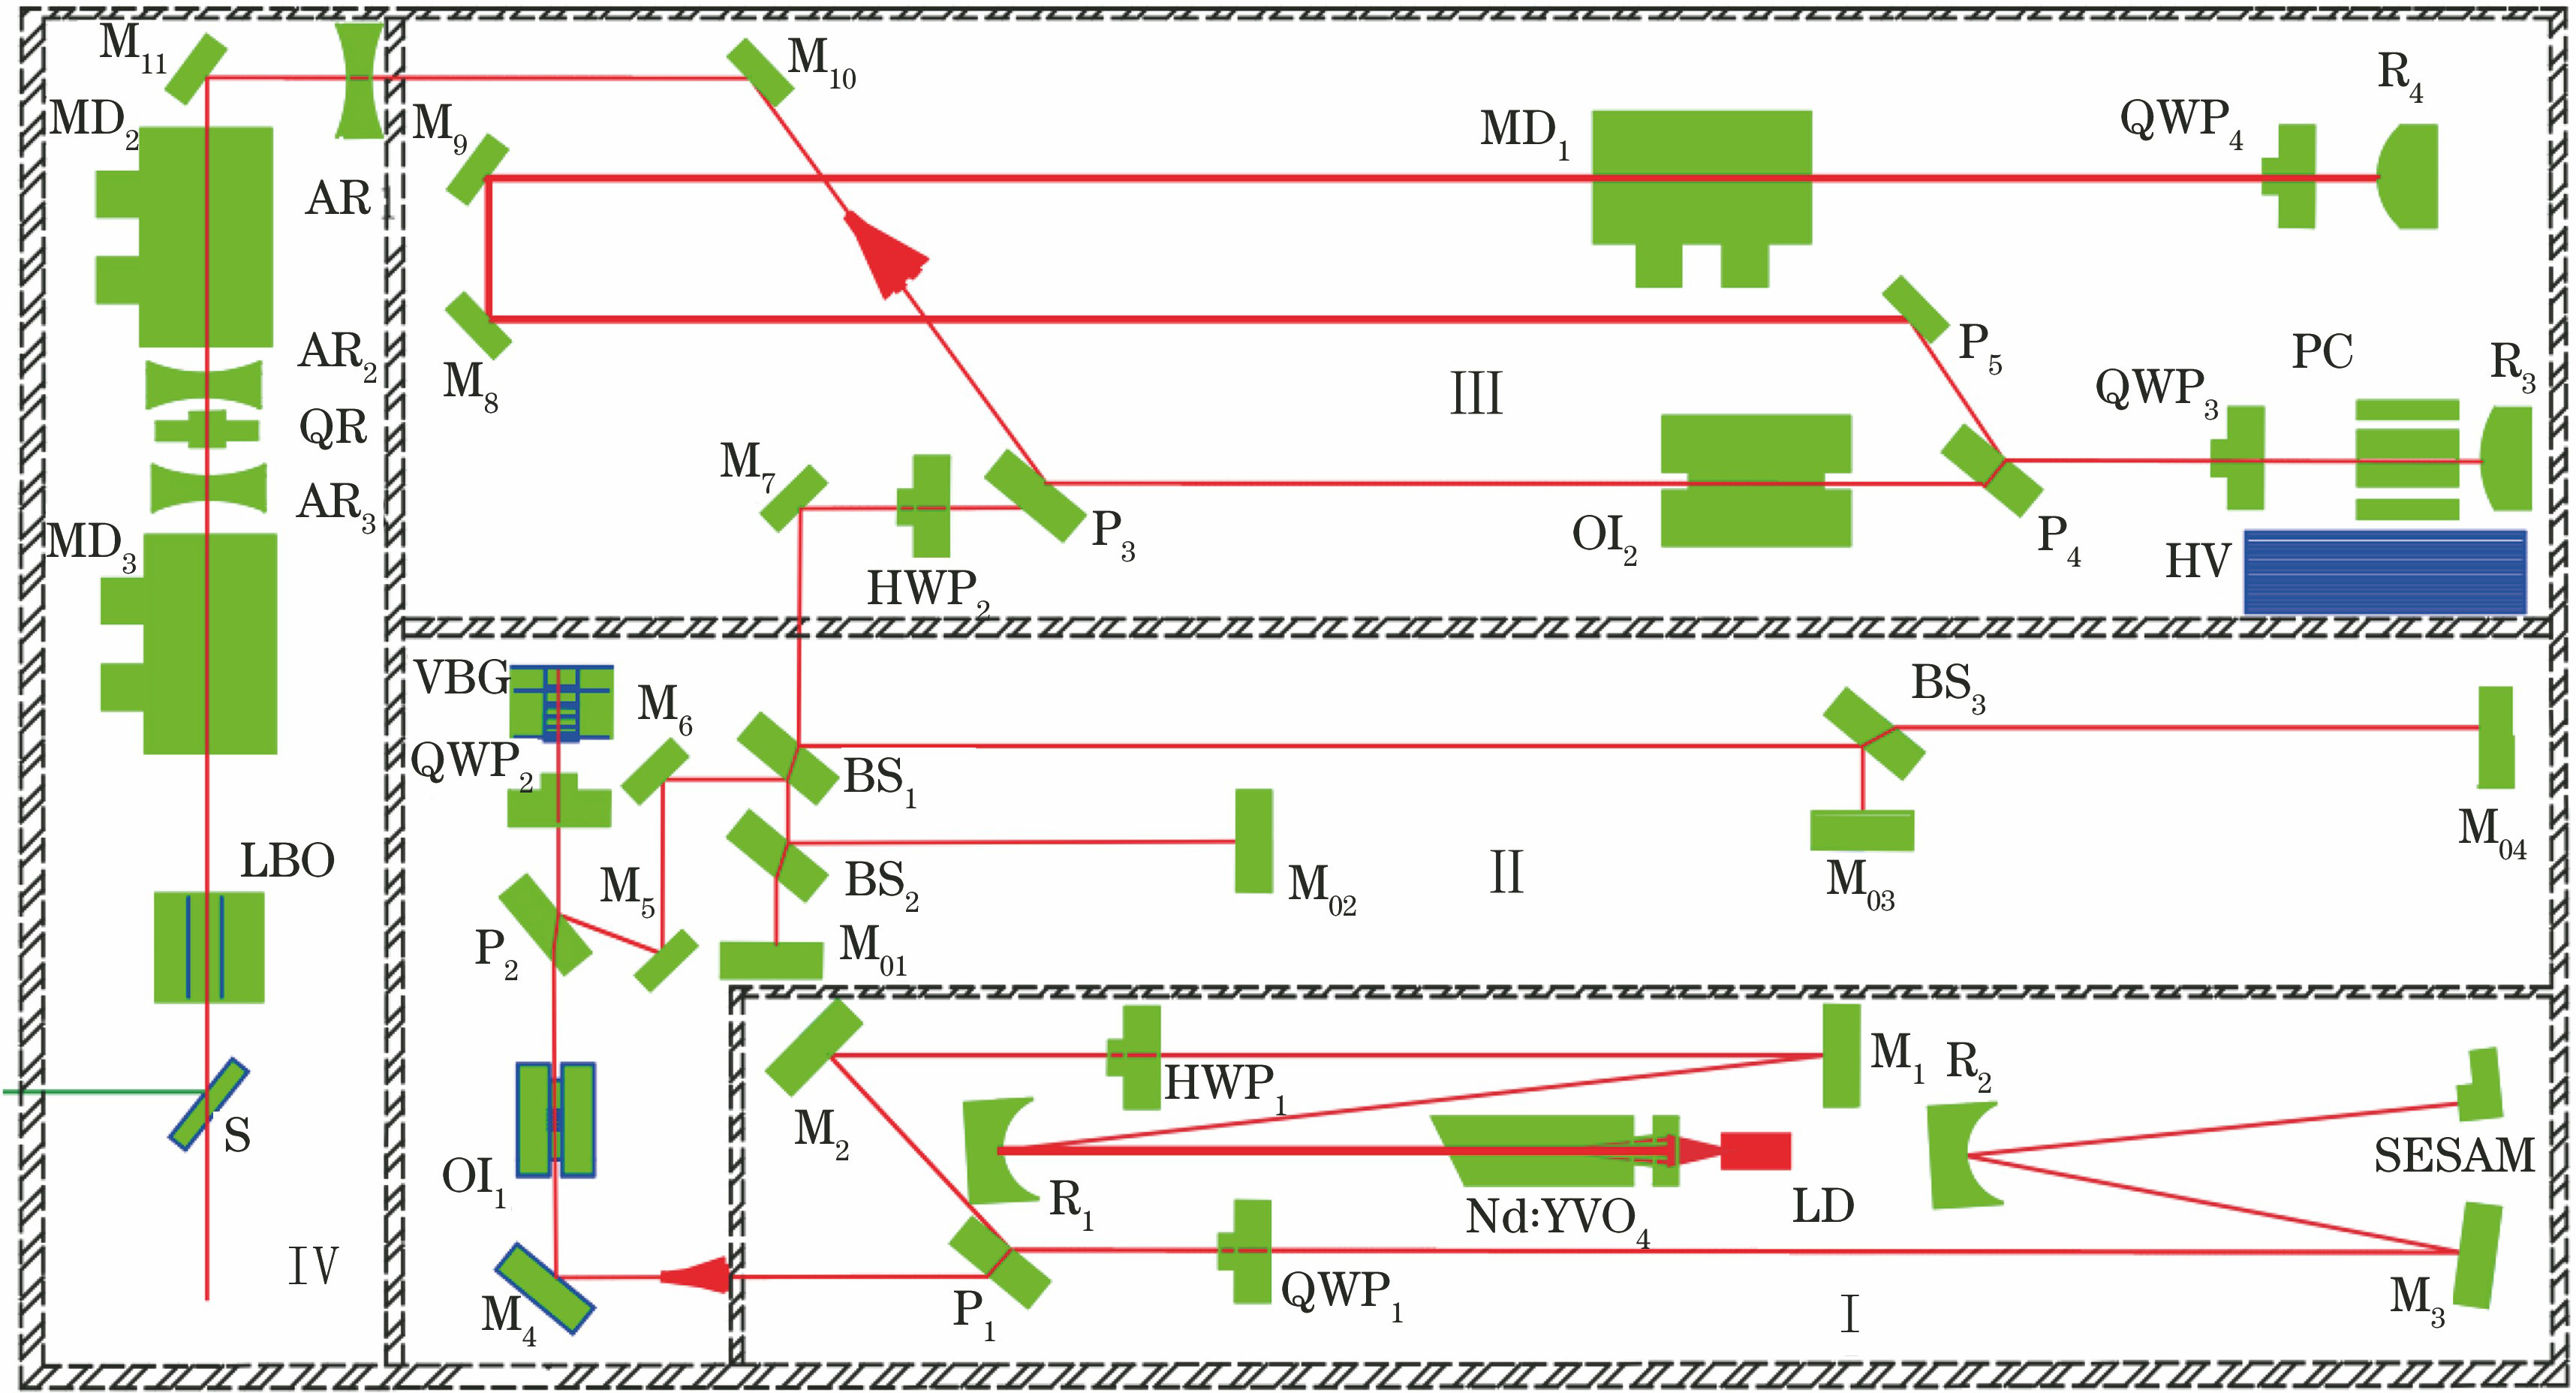 Optical principle diagram of multiple-pulse picosecond laser at kHz repetition rate